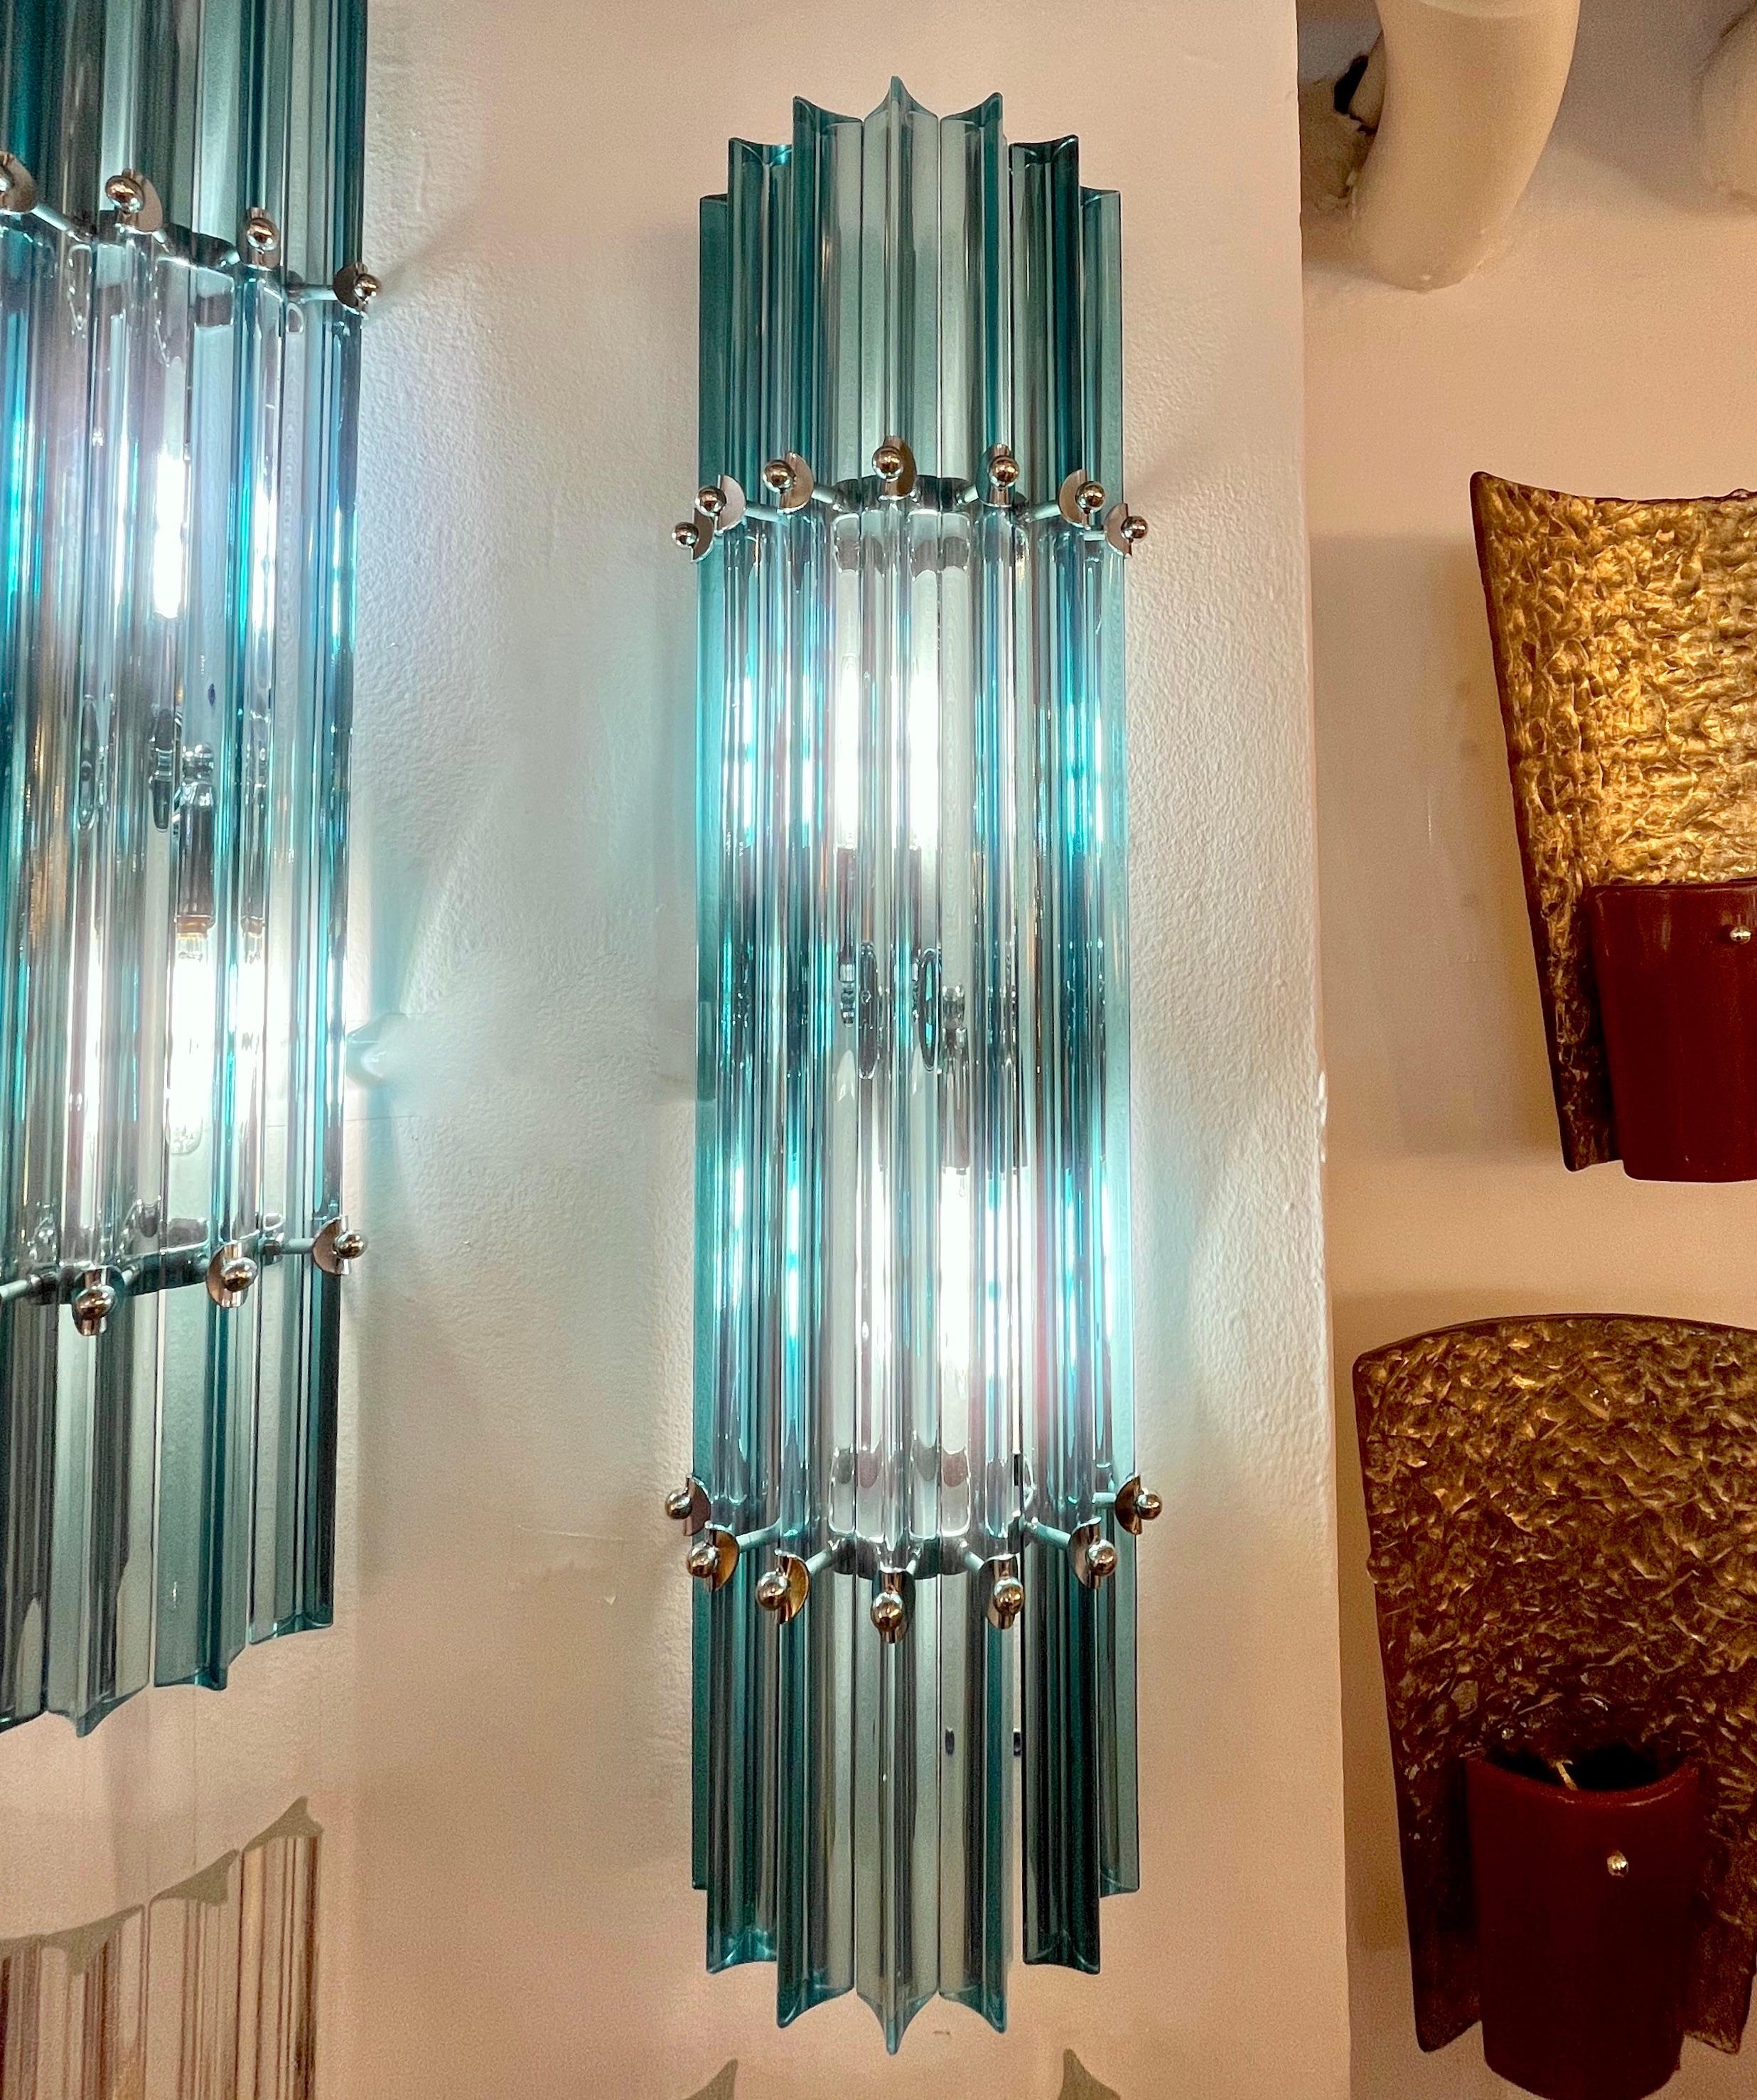 Very sleek custom Venetian pair of glass wall lights with organic modern design, consisting of seven straight aqua blue Murano glass rods of triangular section with attractive concave sides, that not only highlight the curved design but amplify the